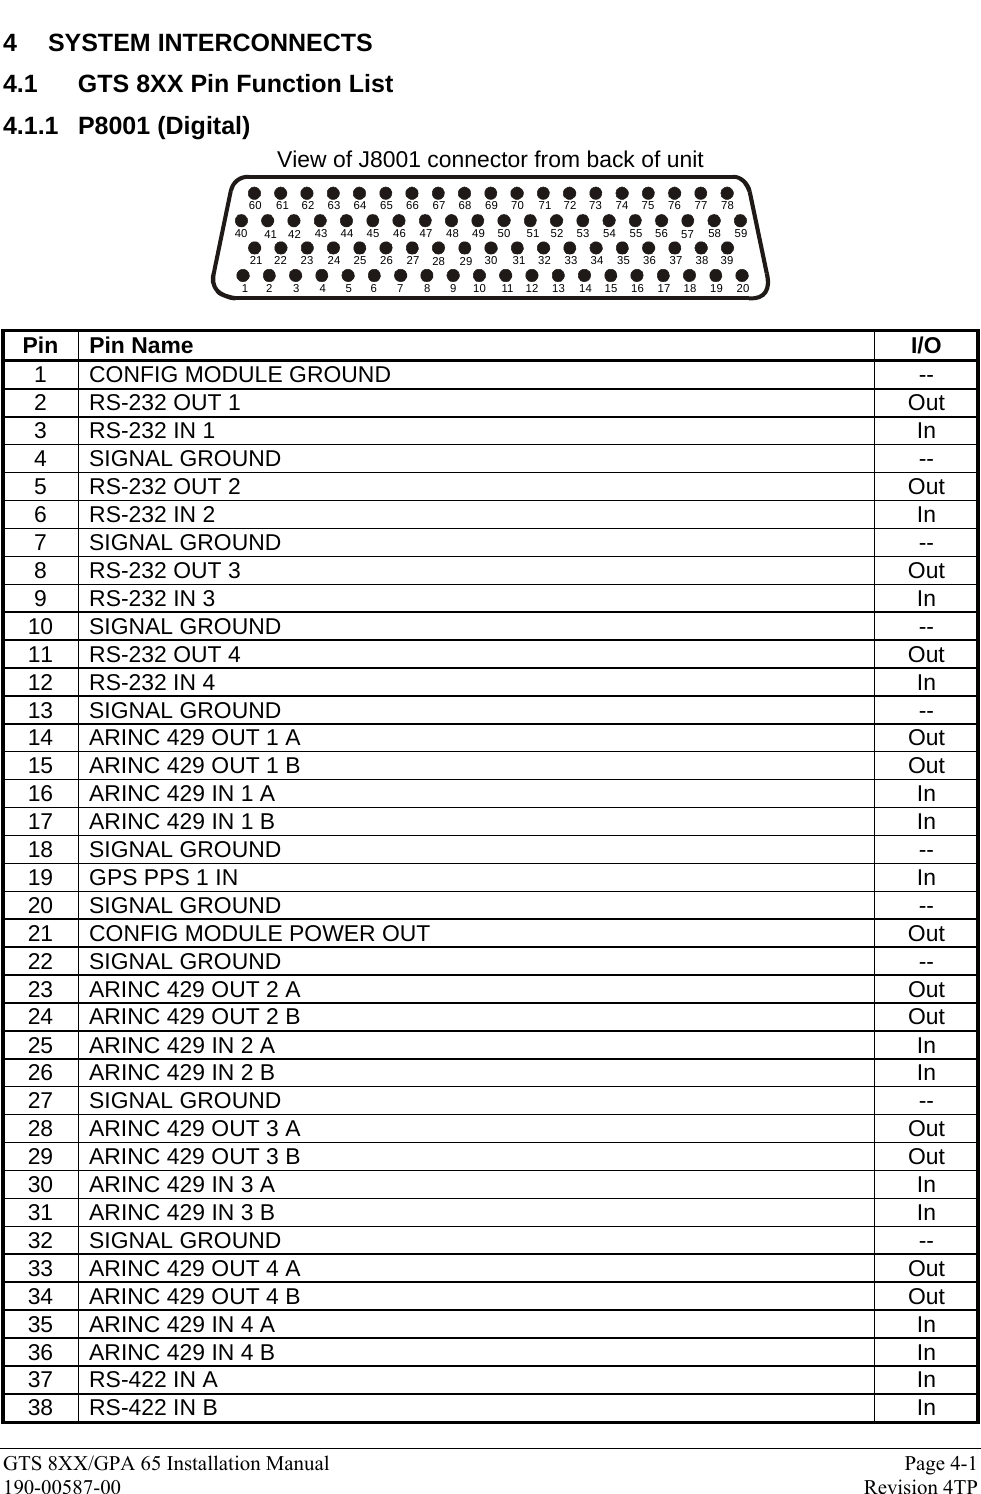  GTS 8XX/GPA 65 Installation Manual  Page 4-1 190-00587-00  Revision 4TP 4 SYSTEM INTERCONNECTS 4.1  GTS 8XX Pin Function List 4.1.1 P8001 (Digital) View of J8001 connector from back of unit 1 2 3 4 5 6 7 8 9 10 1112131415161718192021 22 23 24 25 26 27 28 29 30 31 32 33 34 35 36 37 38 3940 41 42 43 44 45 46 47 48 49 50 51 52 53 54 55 56 57 58 5960 61 62 63 64 65 66 67 68 69 70 71 72 73 74 75 76 77 78  Pin Pin Name  I/O 1 CONFIG MODULE GROUND  -- 2  RS-232 OUT 1  Out 3  RS-232 IN 1  In 4 SIGNAL GROUND  -- 5  RS-232 OUT 2  Out 6  RS-232 IN 2  In 7 SIGNAL GROUND  -- 8  RS-232 OUT 3  Out 9  RS-232 IN 3  In 10 SIGNAL GROUND  -- 11  RS-232 OUT 4  Out 12  RS-232 IN 4  In 13 SIGNAL GROUND  -- 14  ARINC 429 OUT 1 A  Out 15  ARINC 429 OUT 1 B  Out 16  ARINC 429 IN 1 A  In 17  ARINC 429 IN 1 B  In 18 SIGNAL GROUND  -- 19  GPS PPS 1 IN  In 20 SIGNAL GROUND  -- 21  CONFIG MODULE POWER OUT  Out 22 SIGNAL GROUND  -- 23  ARINC 429 OUT 2 A  Out 24  ARINC 429 OUT 2 B  Out 25  ARINC 429 IN 2 A  In 26  ARINC 429 IN 2 B  In 27 SIGNAL GROUND  -- 28  ARINC 429 OUT 3 A  Out 29  ARINC 429 OUT 3 B  Out 30  ARINC 429 IN 3 A  In 31  ARINC 429 IN 3 B  In 32 SIGNAL GROUND  -- 33  ARINC 429 OUT 4 A  Out 34  ARINC 429 OUT 4 B  Out 35  ARINC 429 IN 4 A  In 36  ARINC 429 IN 4 B  In 37 RS-422 IN A  In 38 RS-422 IN B  In 